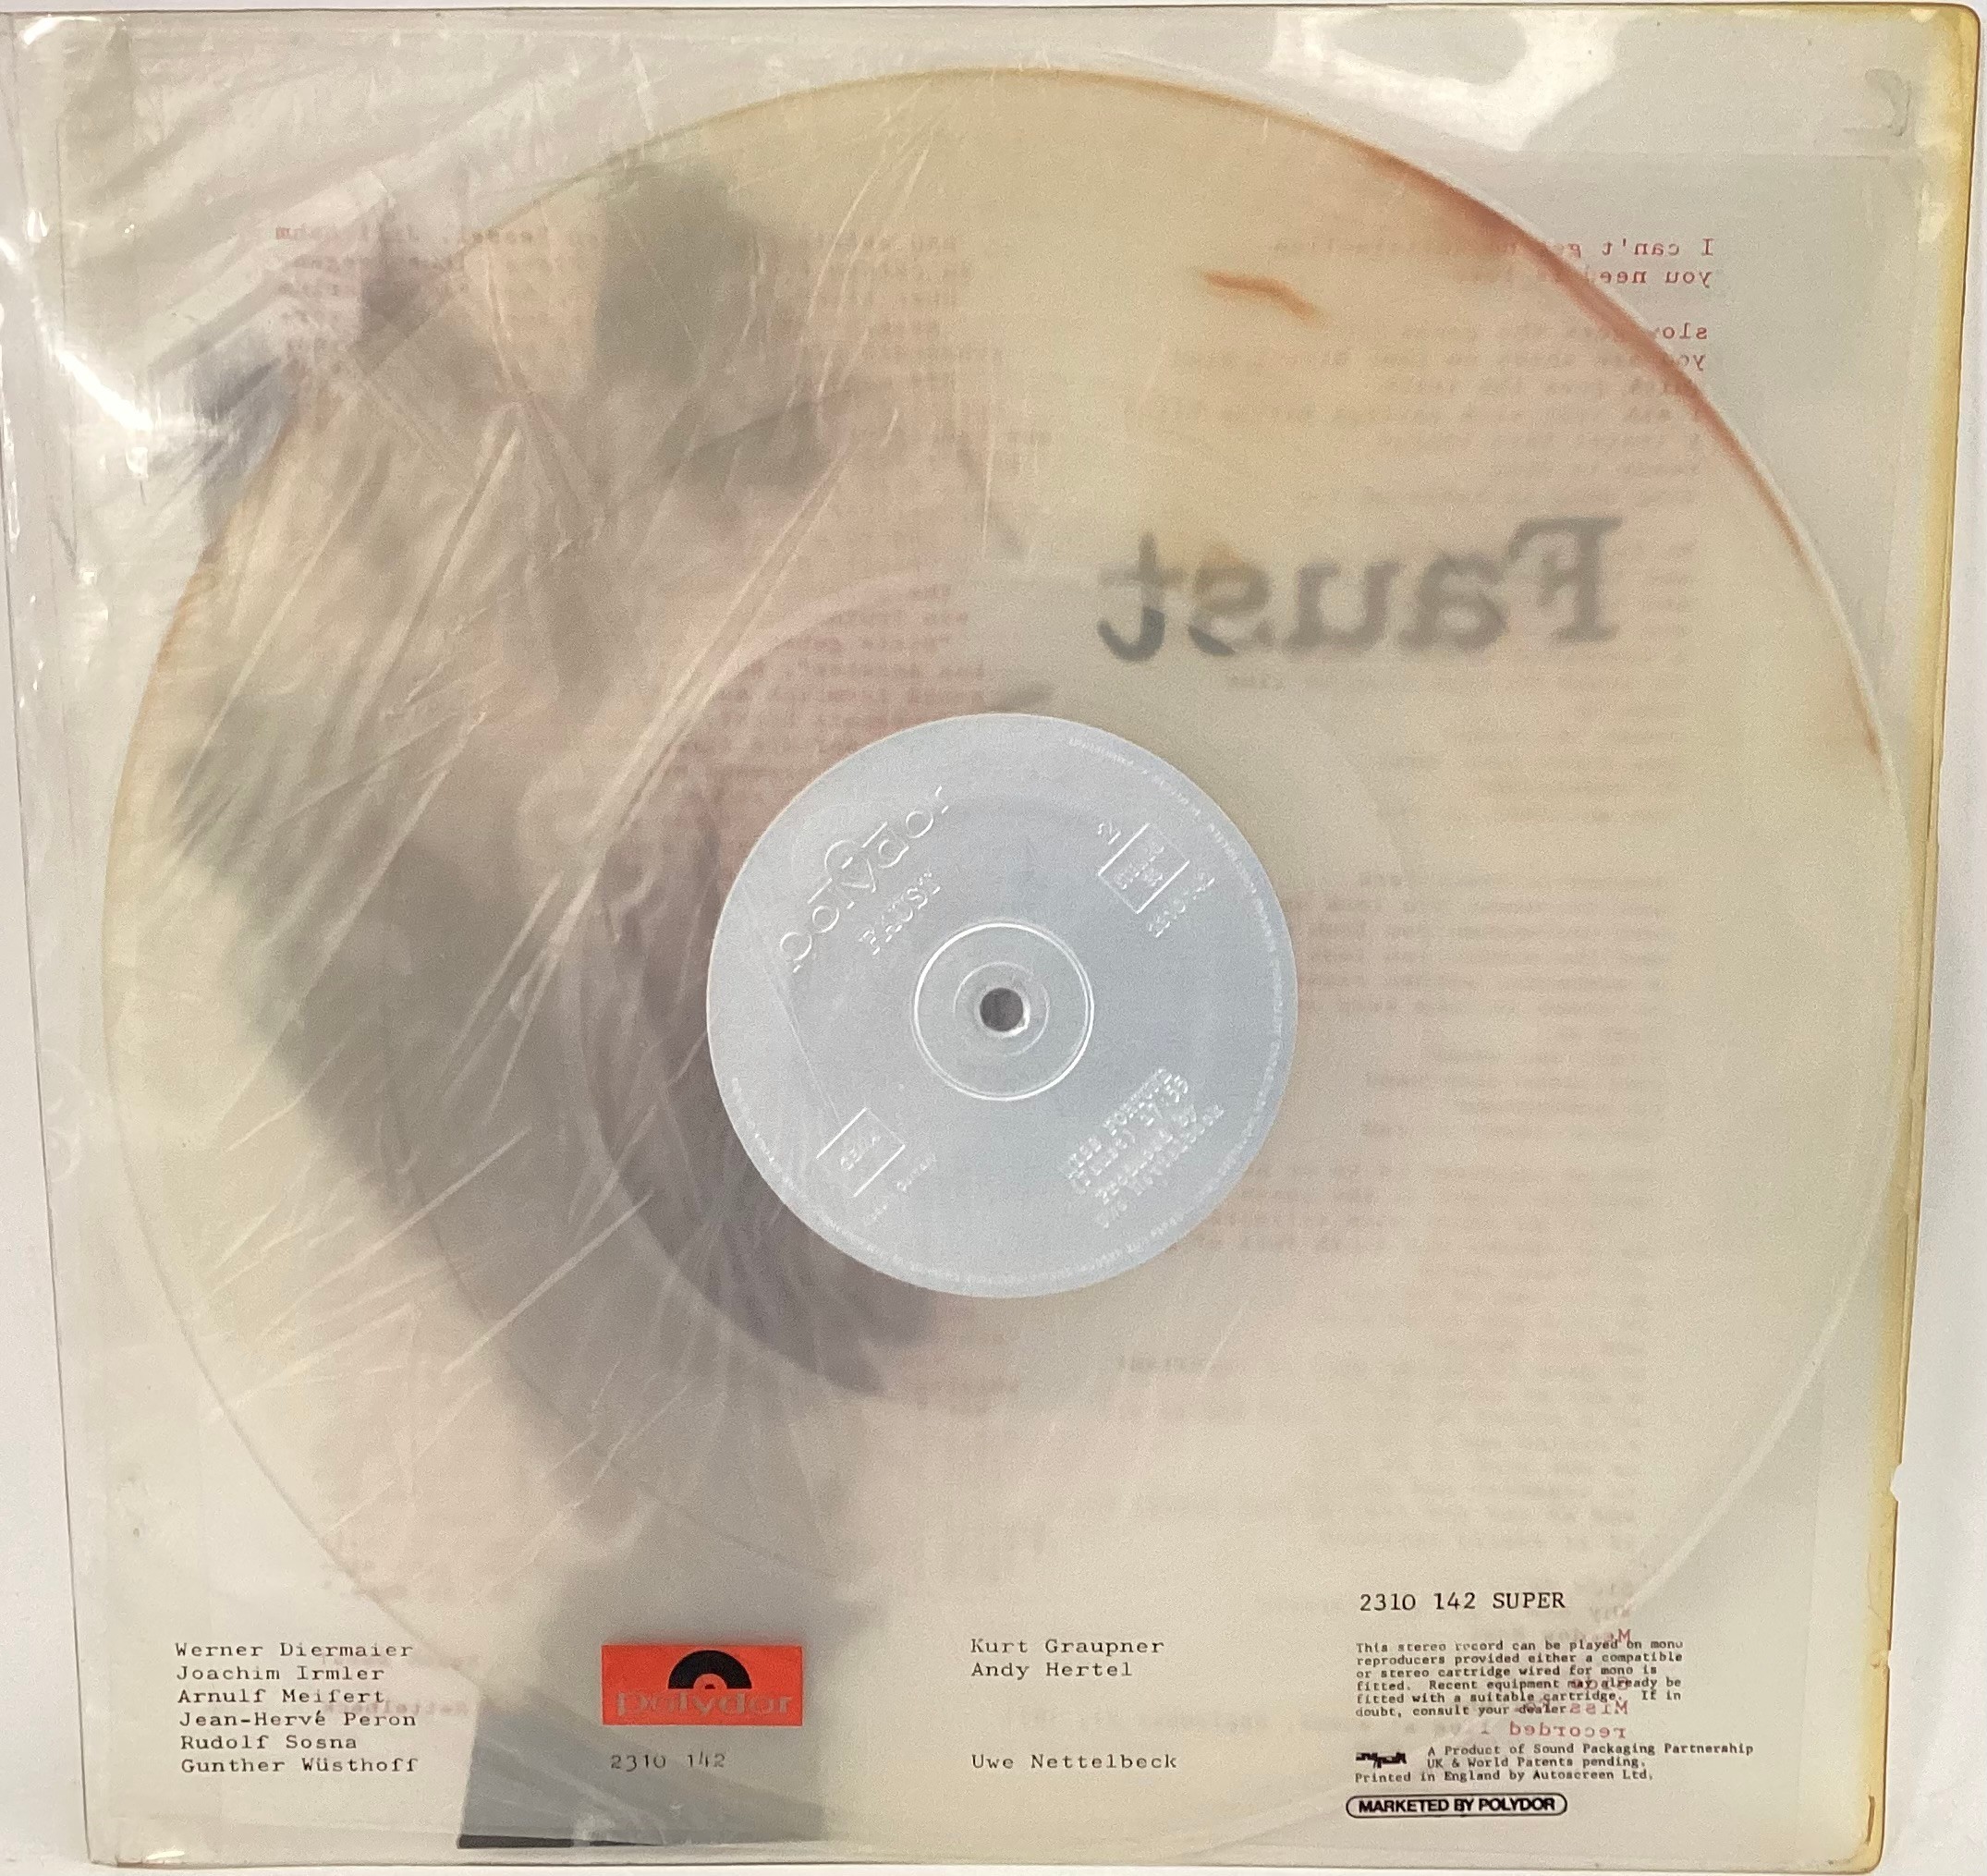 FAUST CLEAR VINYL LP RECORD. Rare original 1972 UK pressing on Clear Vinyl with embossed Silver - Image 2 of 4